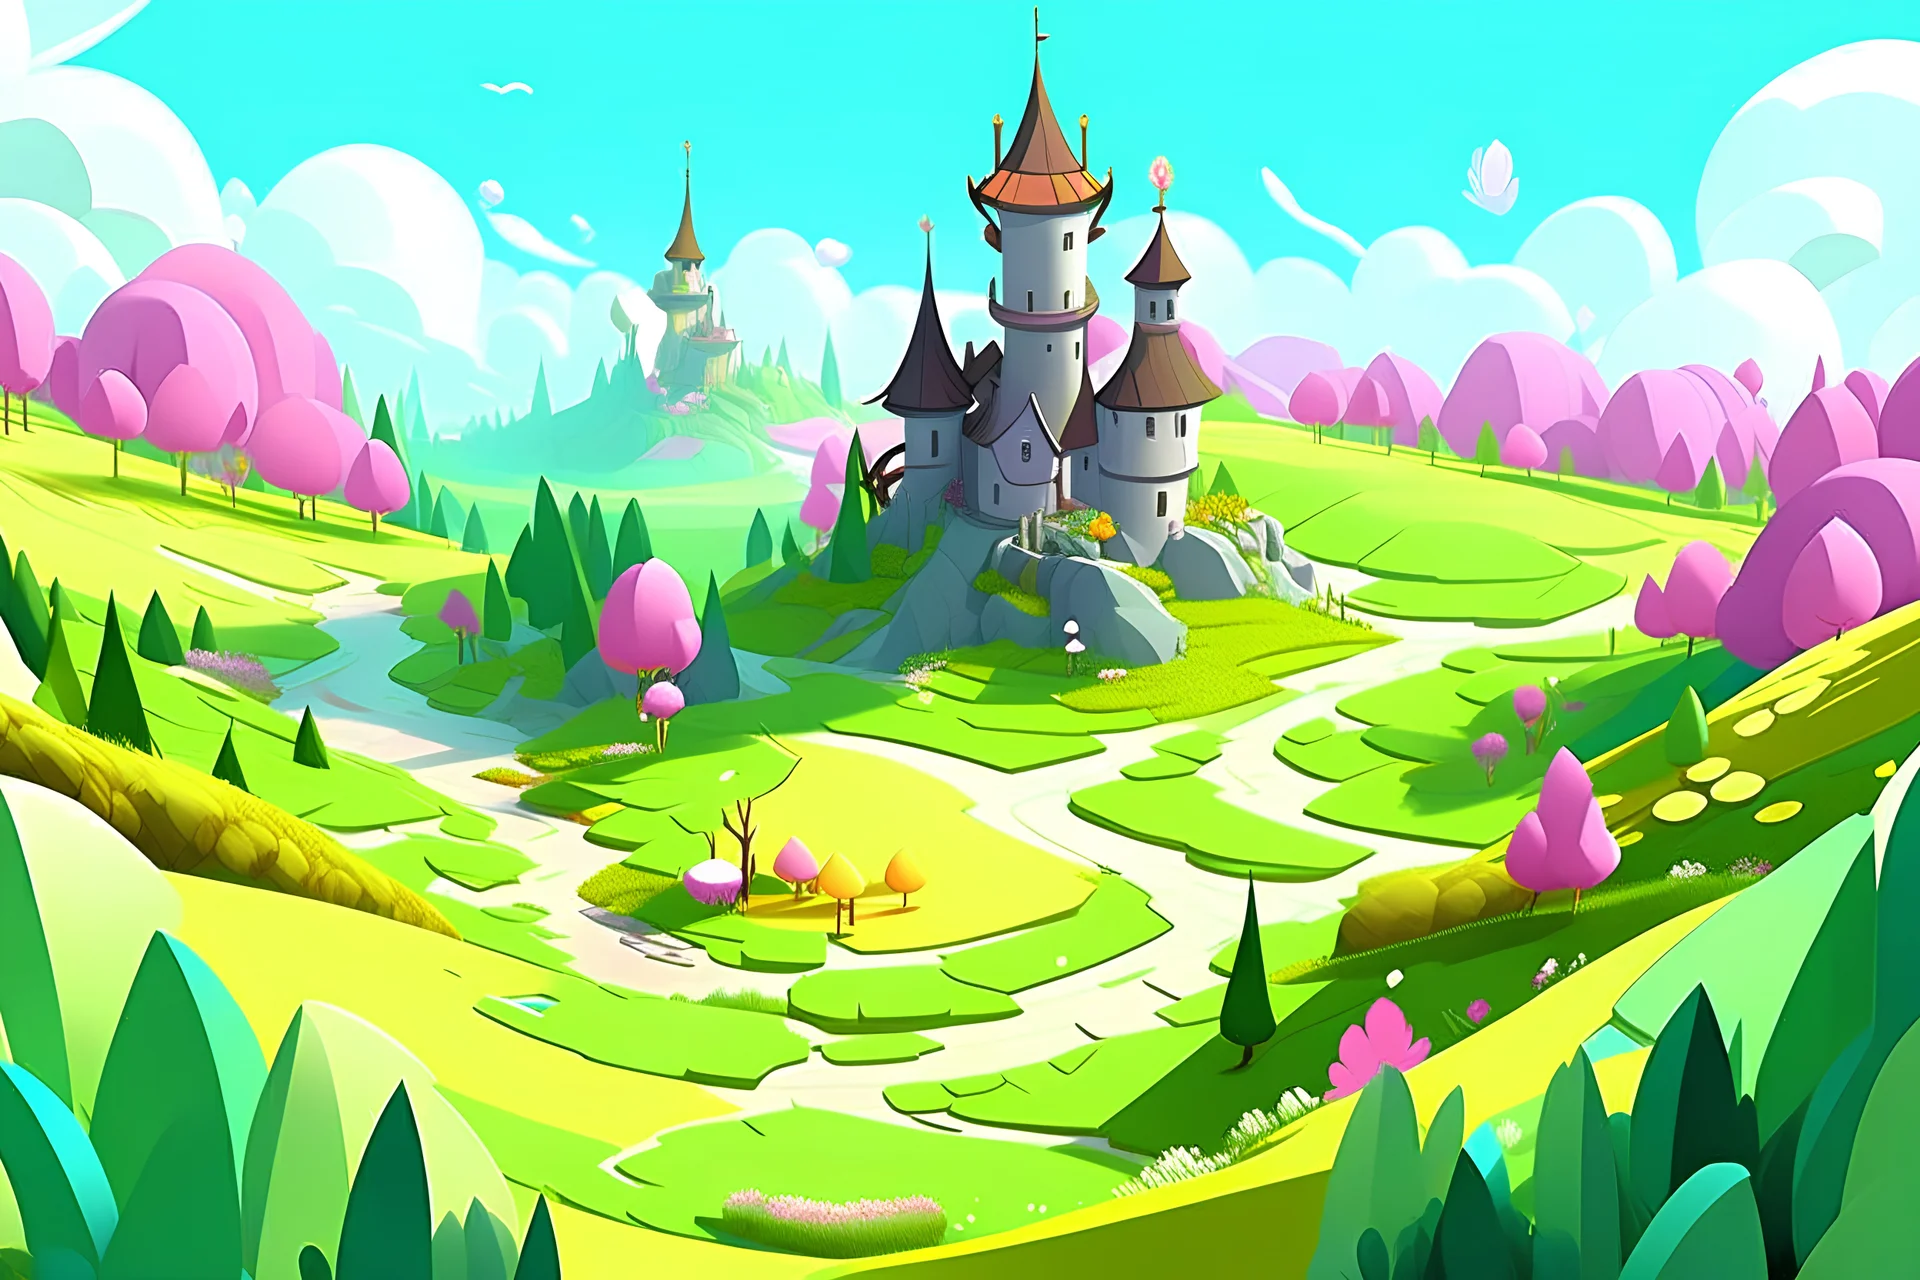 A 3D stylized environment art of a kingdom surrounded by flowery meadows and multiple vineyards, windmills are scattered there, in the cartoon style